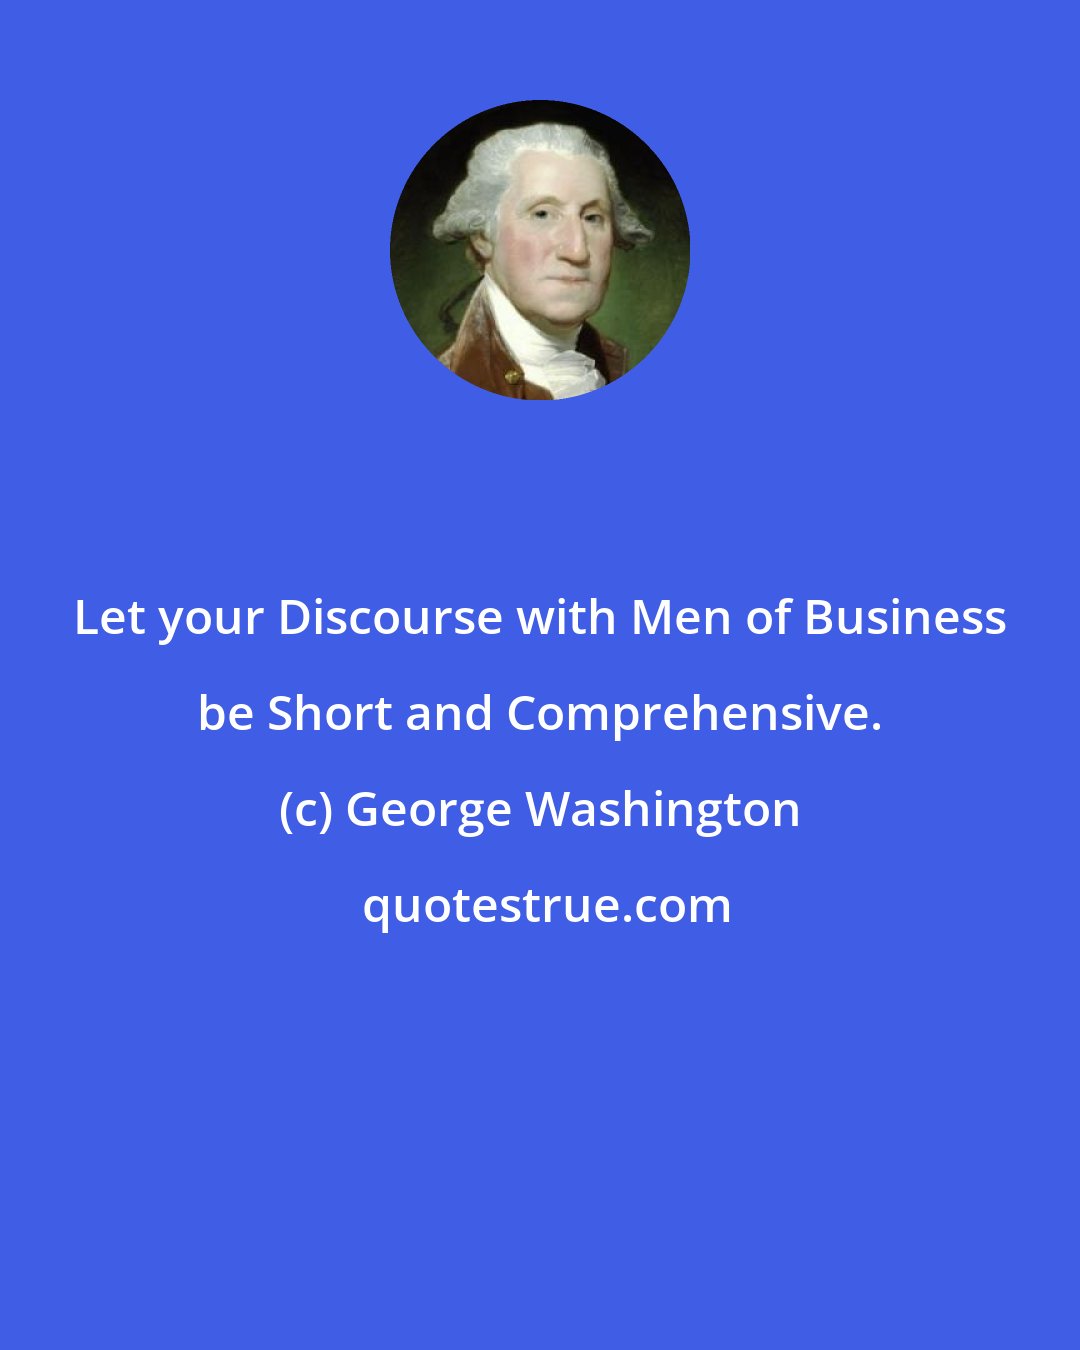 George Washington: Let your Discourse with Men of Business be Short and Comprehensive.